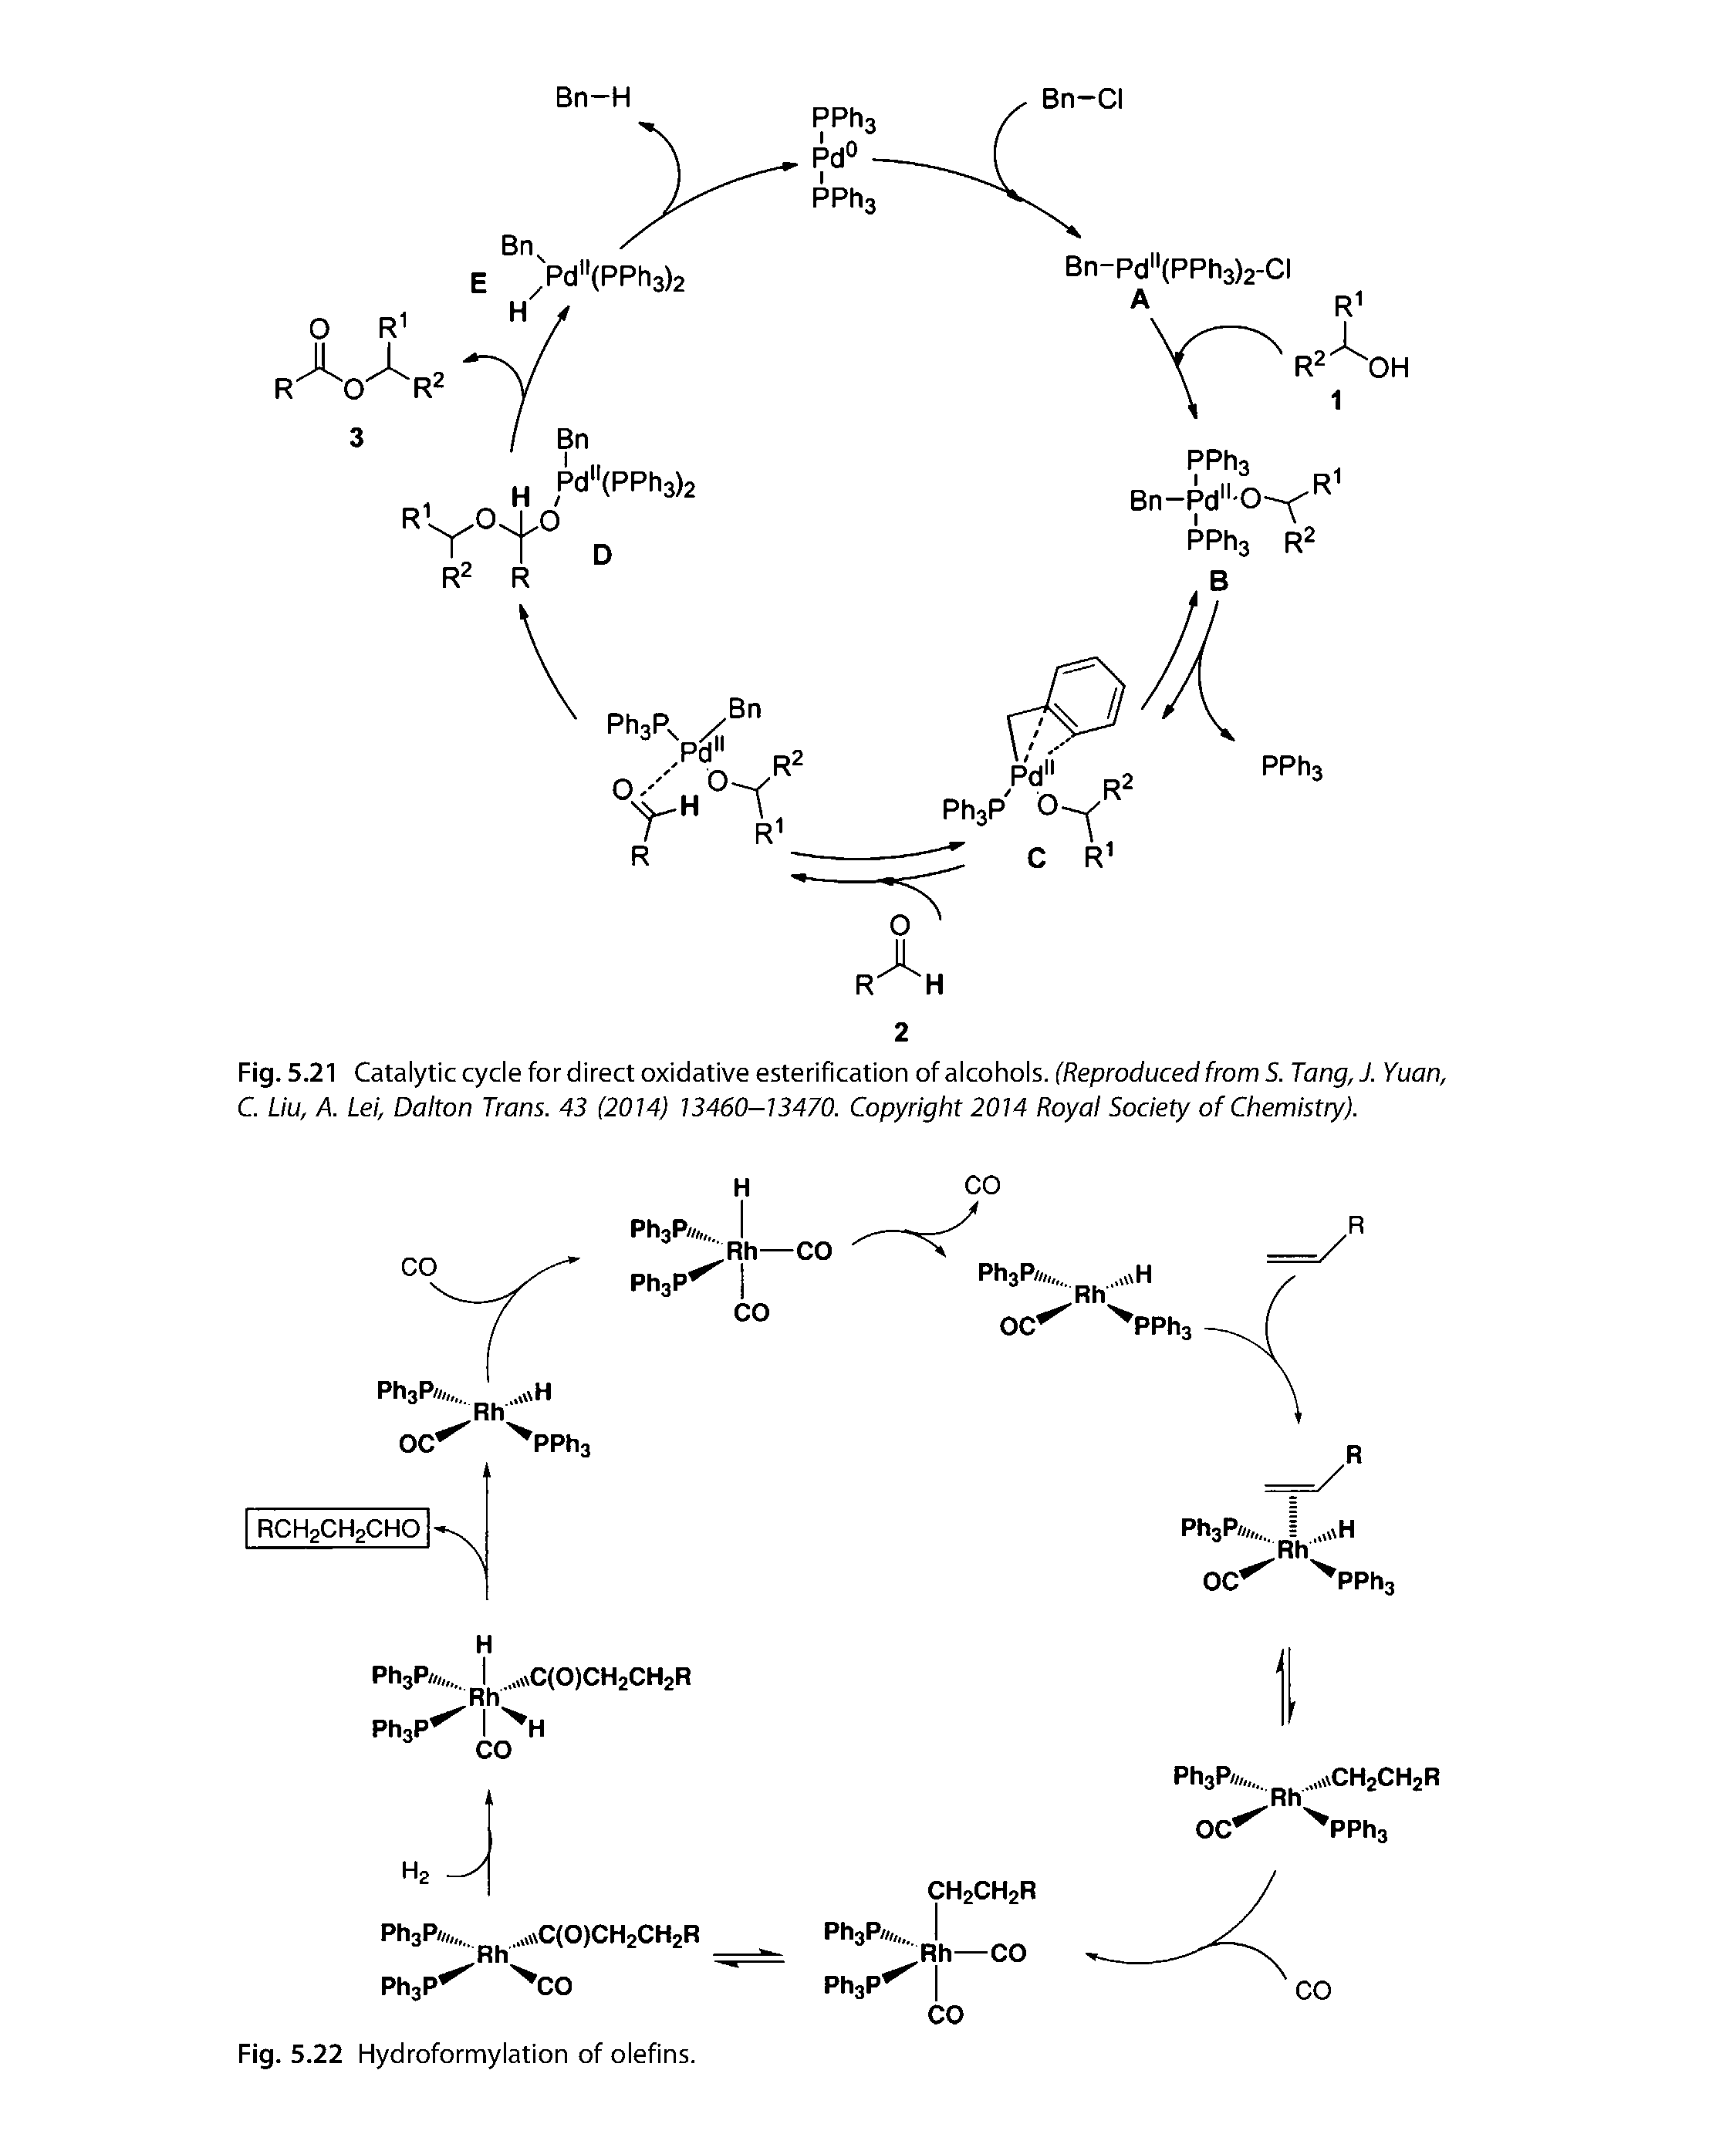 Fig. 5.21 Catalytic cycle for direct oxidative esterification of alcohols. (Reproduced from S. Tang,J. Yuan, C. Liu, A. Lei, Dalton Trans. 43 (2014) 13460—13470. Copyright 2014 Royal Society of Chemistry).